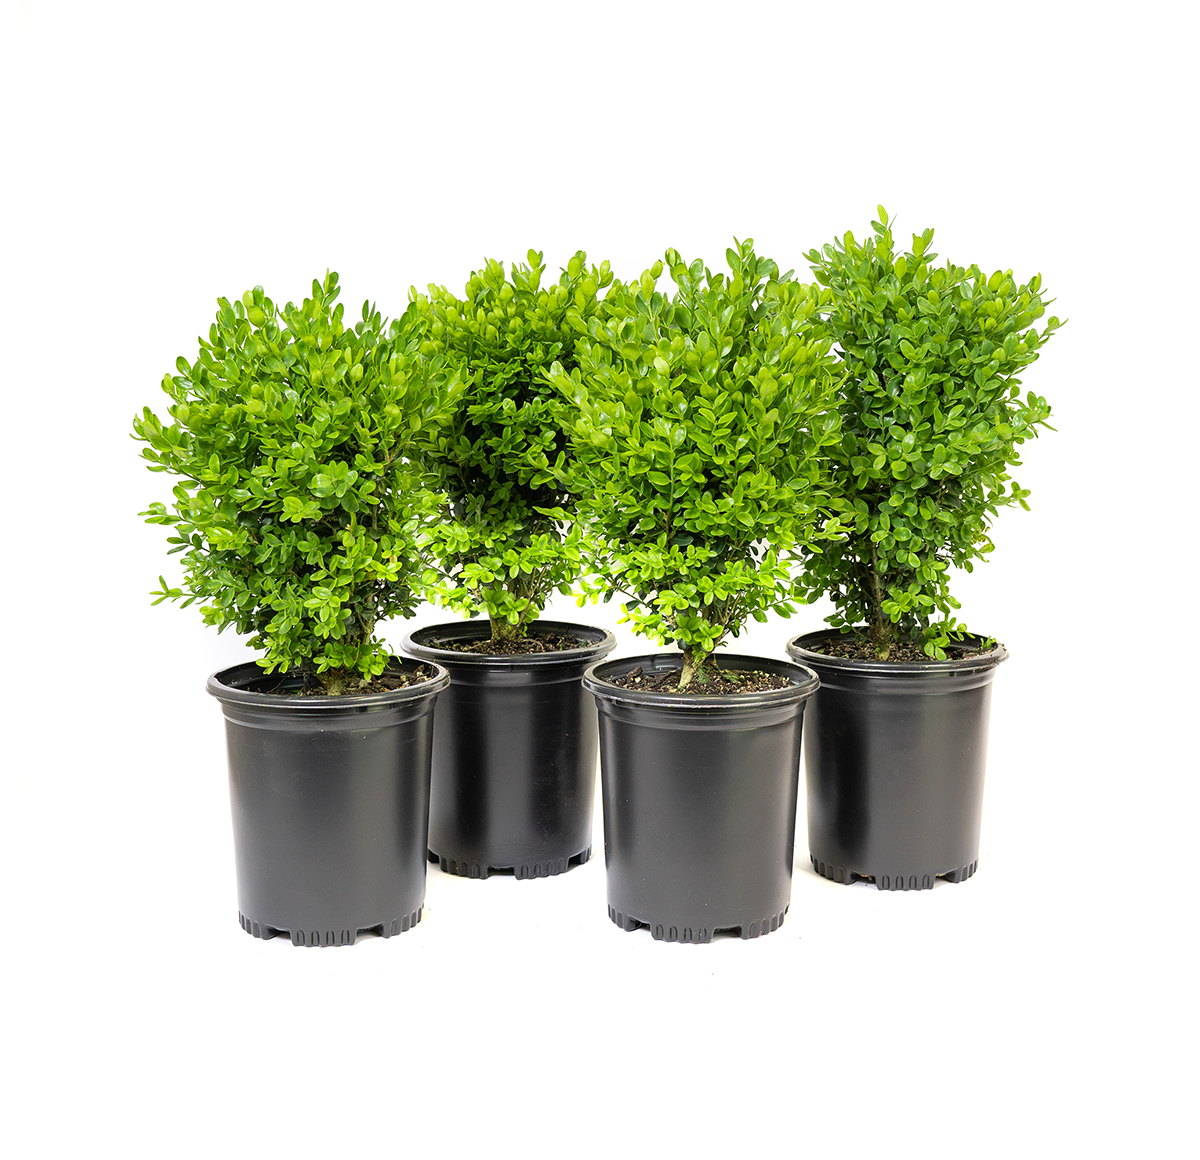 a potted four back of dwarf English boxwood, is has been the most extensively planted boxwood in the United States over the past century